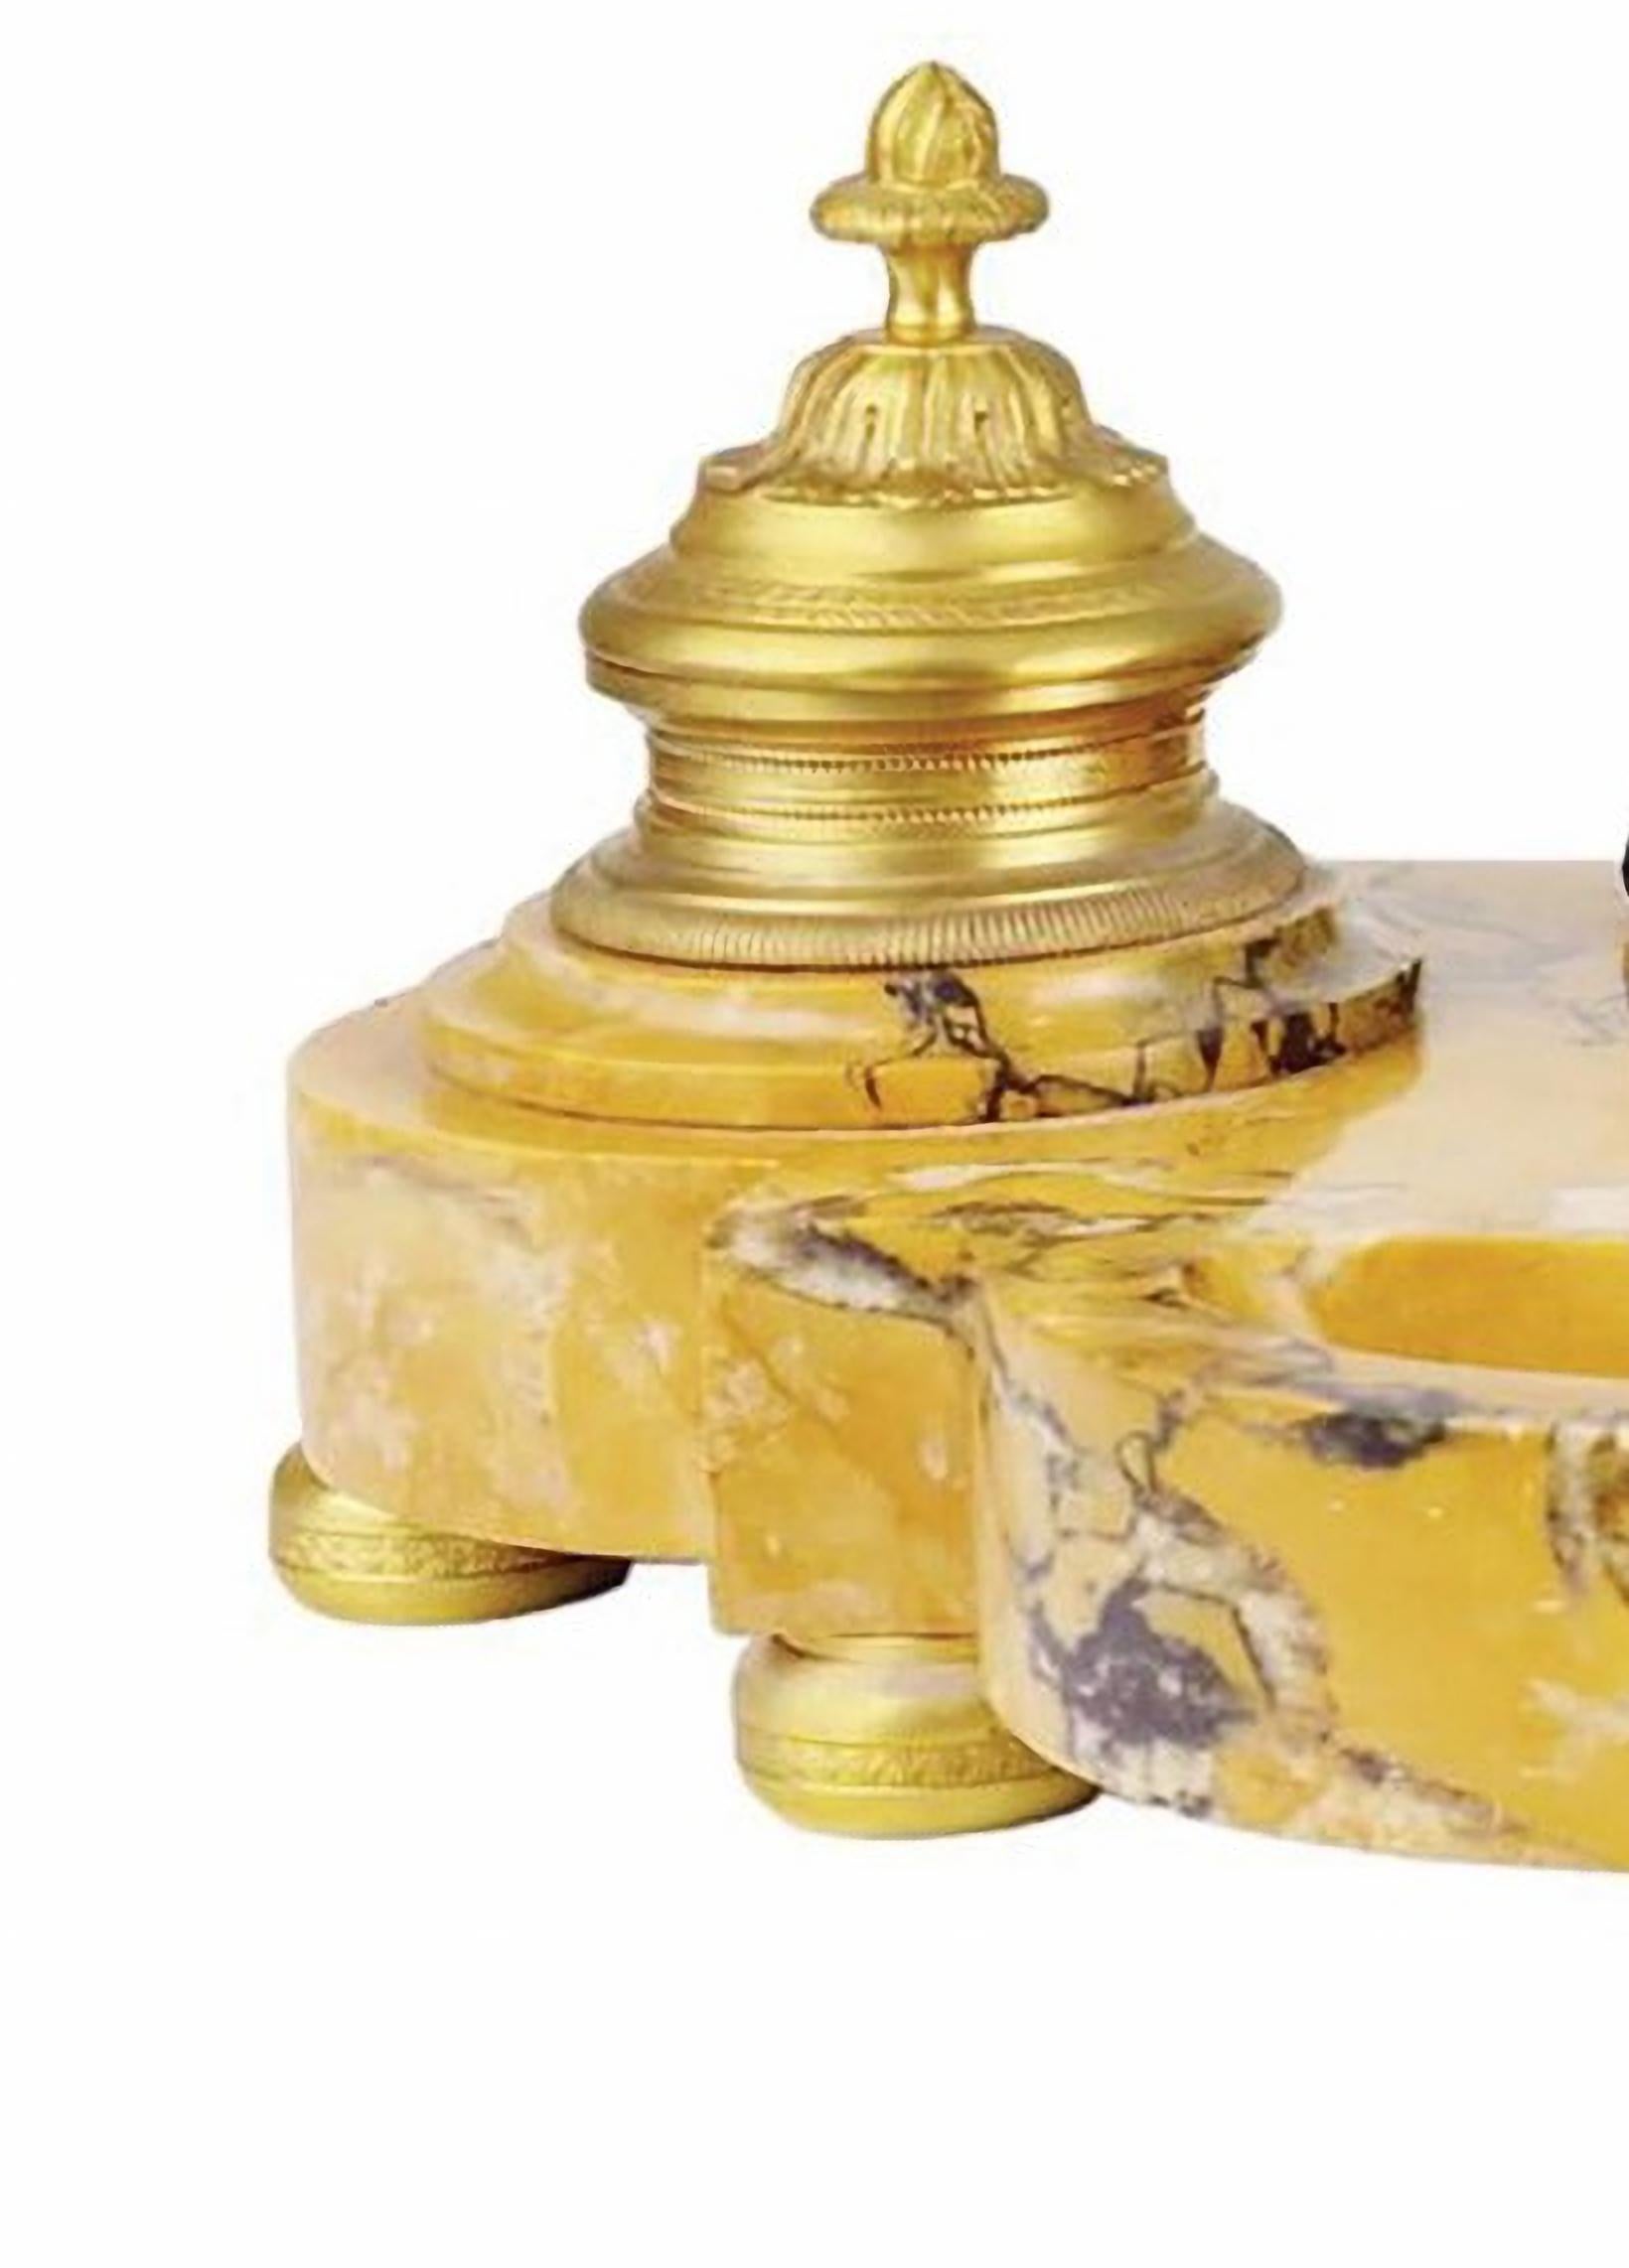 Important Napoleon III lion inkwell, 19th century
In veined yellow Siena marble, centered with a lion's head with a long mane in bronze with dark patina, surrounded by two finely chiseled gilt bronze inkwells holding a small glass reservoir.